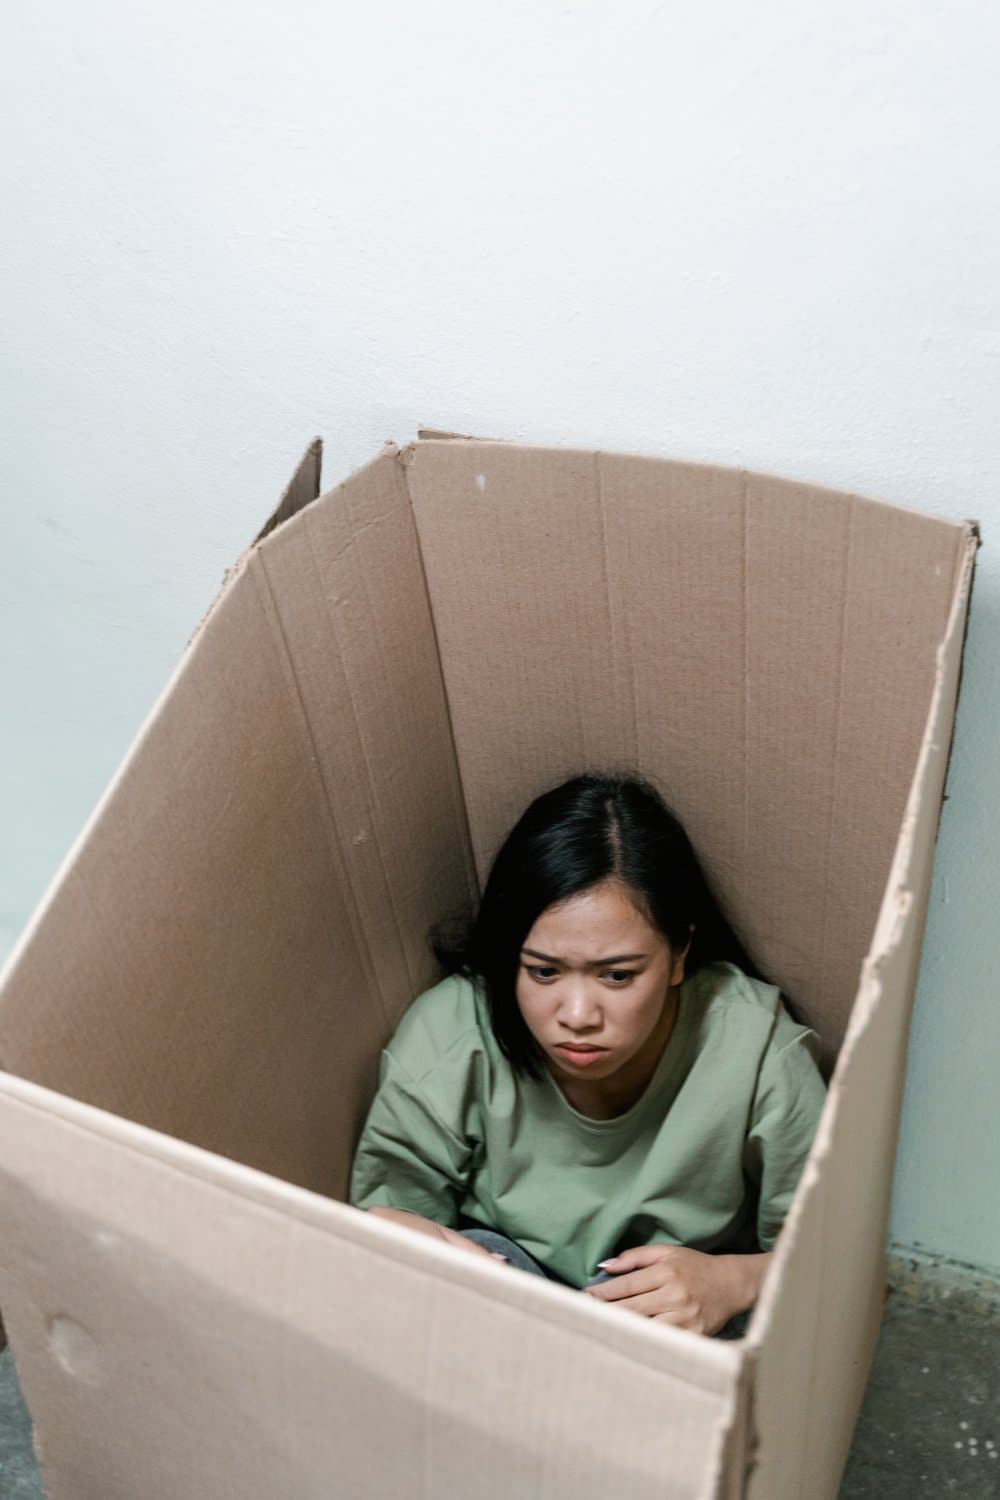 A woman hiding in a box because of anxiety.